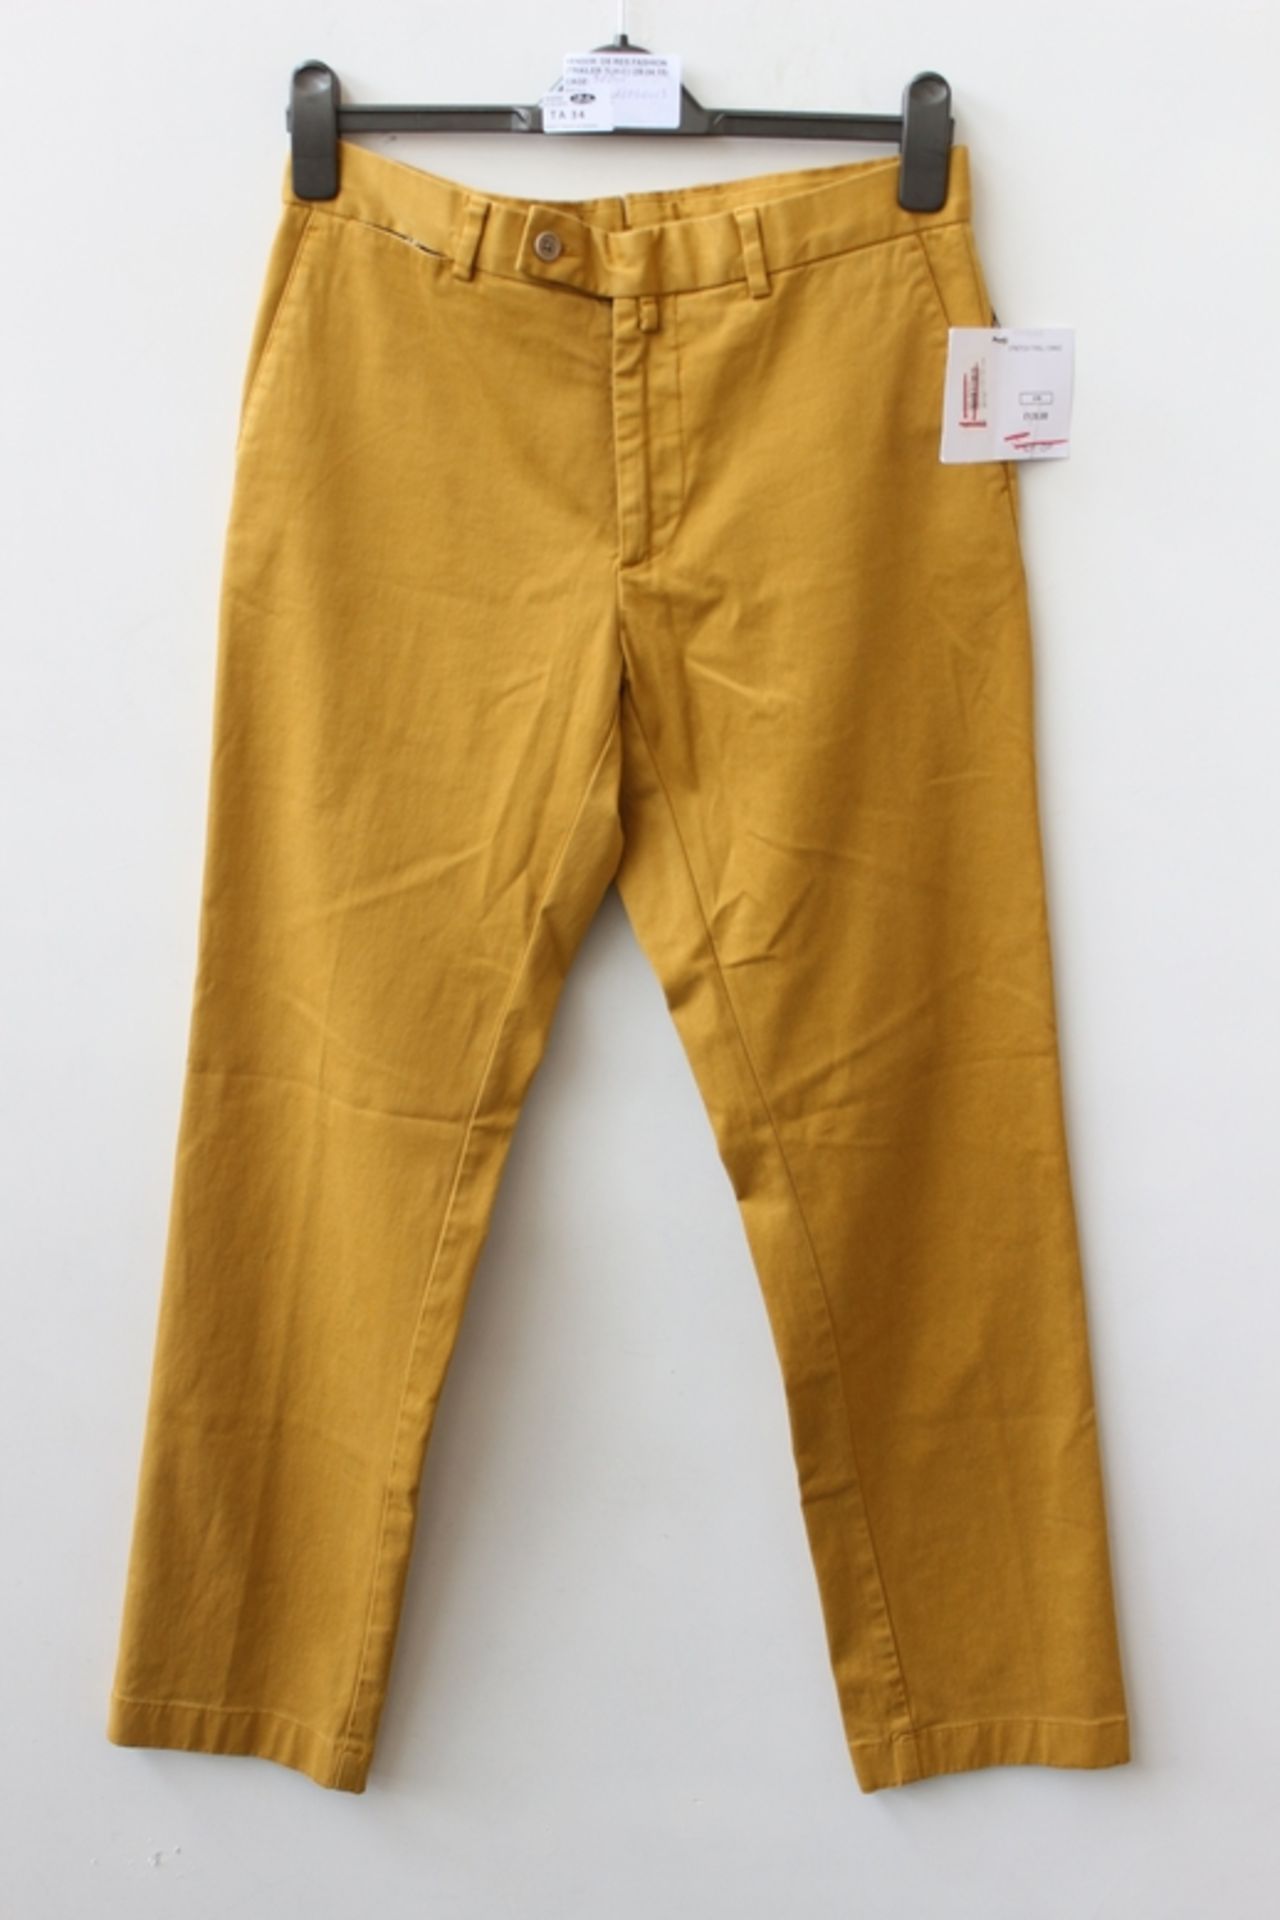 ONE BRAND NEW PAIR OF HACKKET CHINOS SIZE 32R RRP £120 (DS RES FASHION TRAILER TLH-C CAGE 38.041